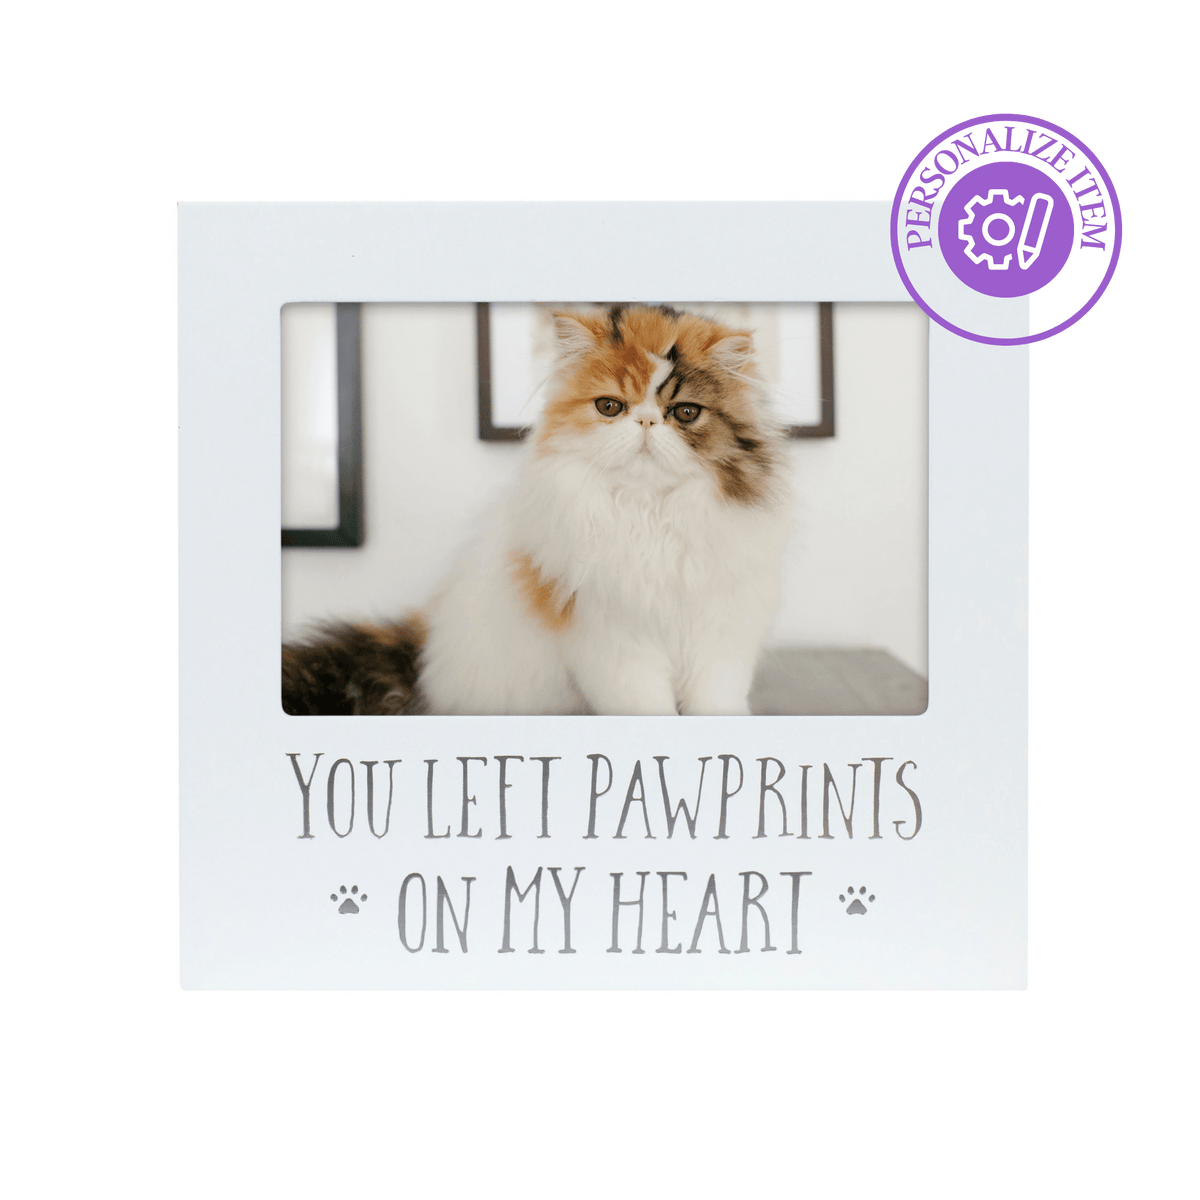  Personalized Pet Loss Sympathy &amp; Memorial Gifts - Pet memorial picture frame